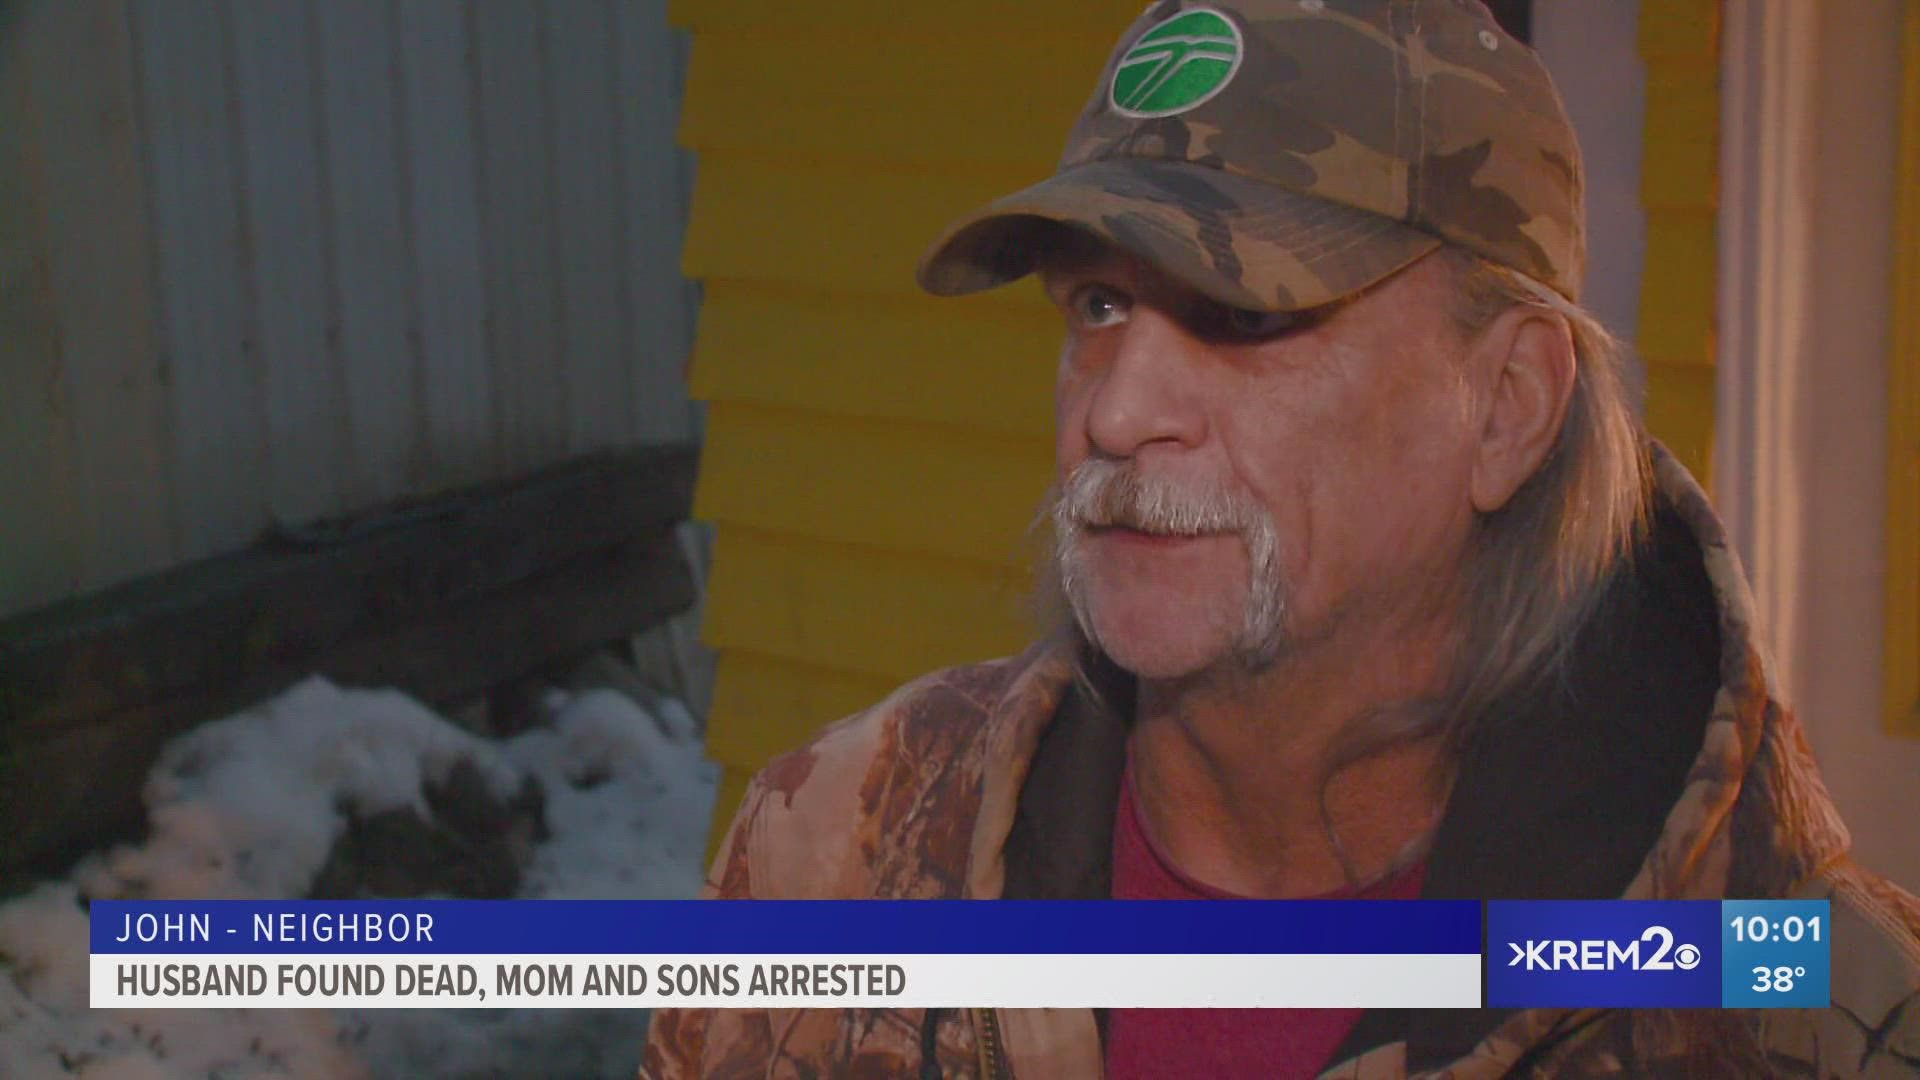 KREM 2's Kyle Simchuk visited the Stevens County property and talked to a neighbor who knew the family.